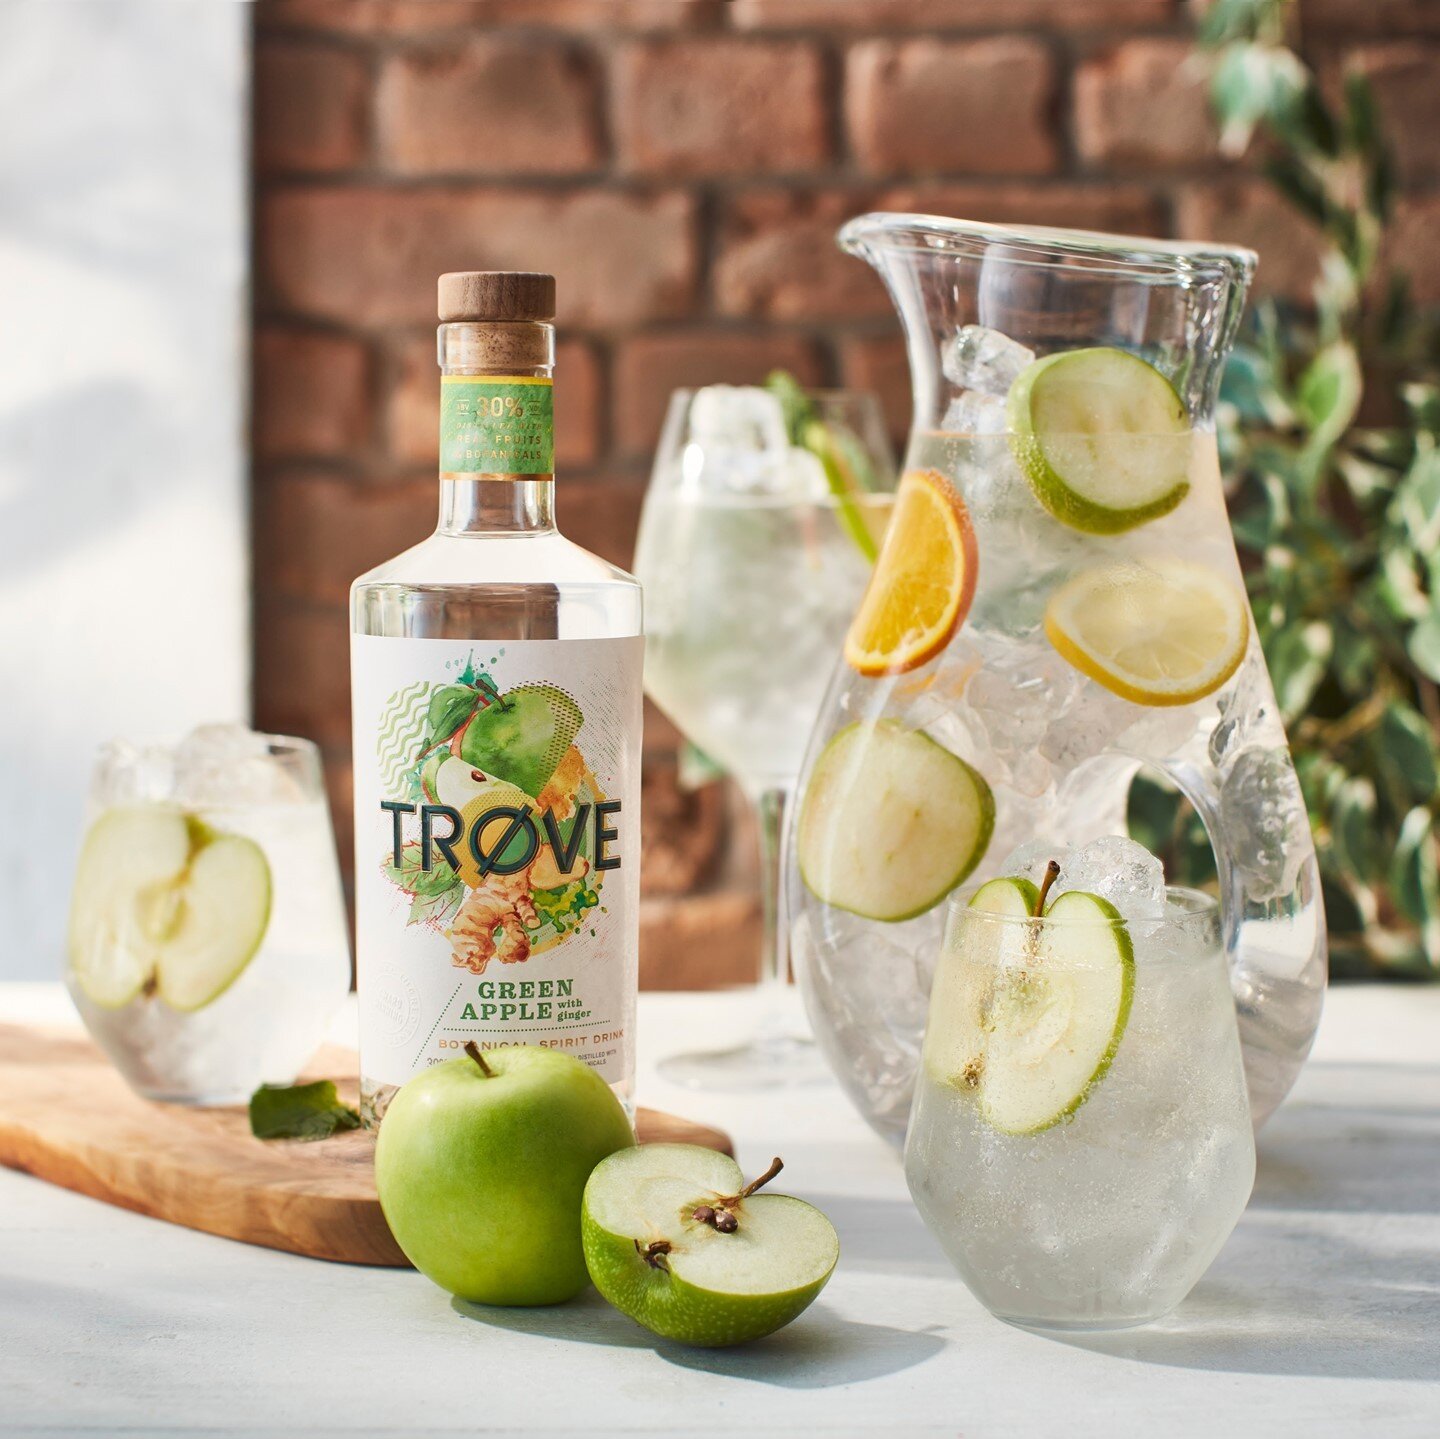 Need an easy crowd pleaser for the weekend?⁠
⁠
Serve up a jug of sunshine, otherwise known as TR&Oslash;VE Green Apple and tonic ☀️ ⁠ ⁠
⁠
PLUS, you can grab a bottle for just &pound;20 this week, link in bio 👆⁠
⁠
#trove #drinktrove #sunshine #bankho